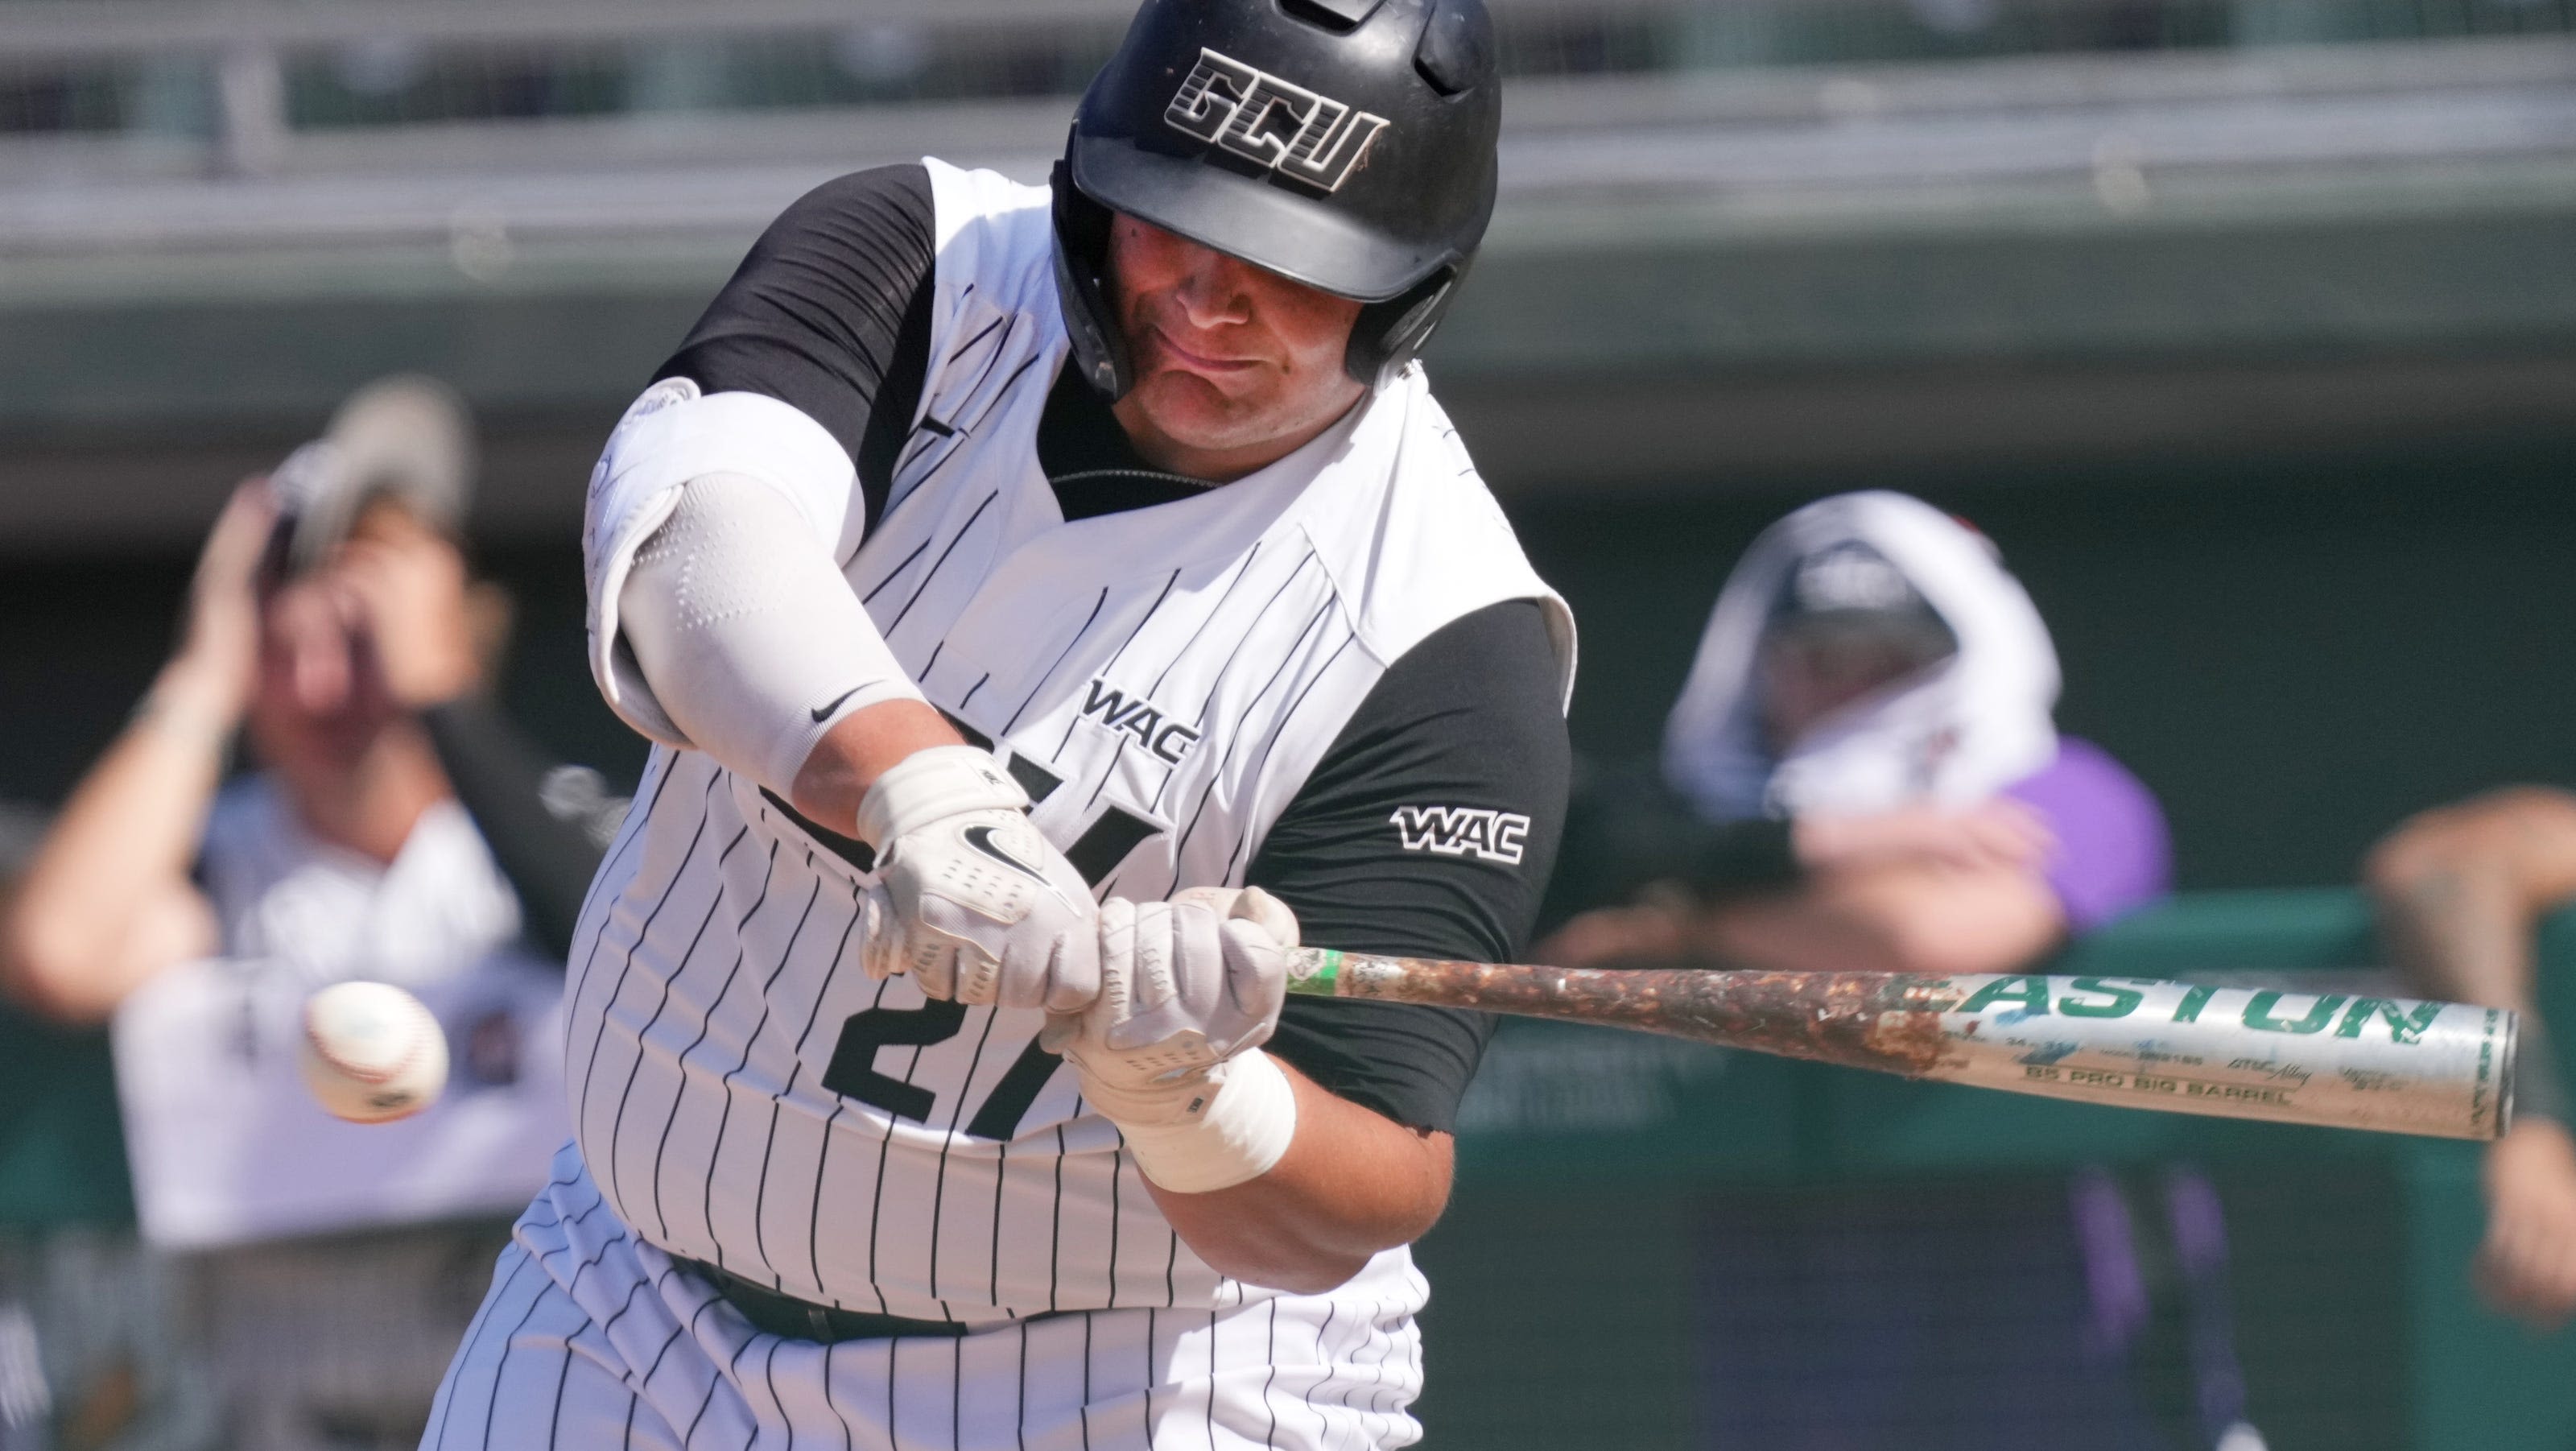 Top-seed GCU baseball has to go through loser's bracket after WAC loss to Tarleton State